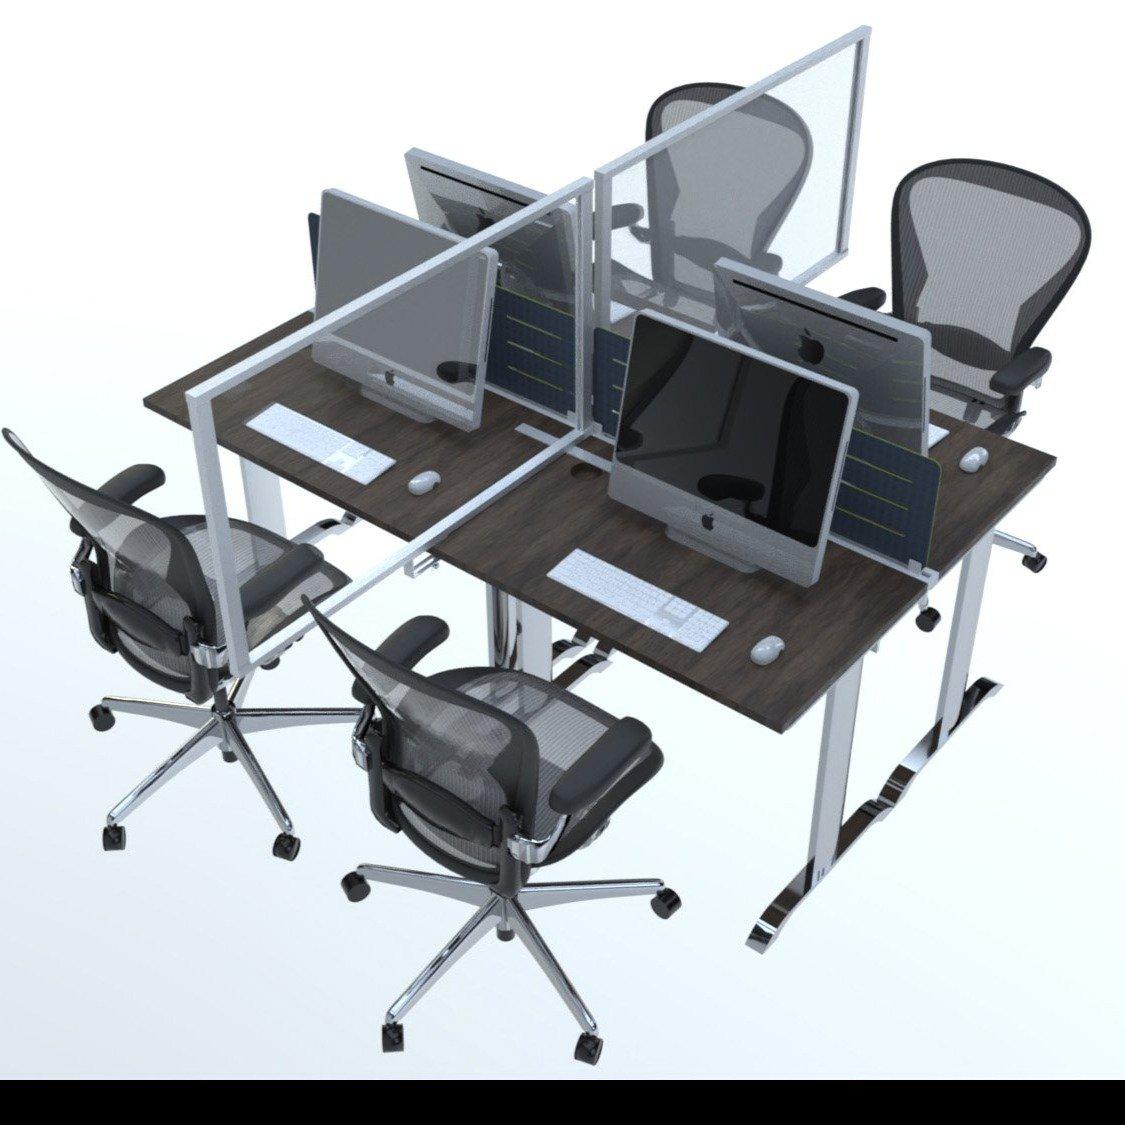 Desktop Clear Infection Barrier Screen See-through Tabletop Protection Divider Panel-Distinct Designs (London) Ltd